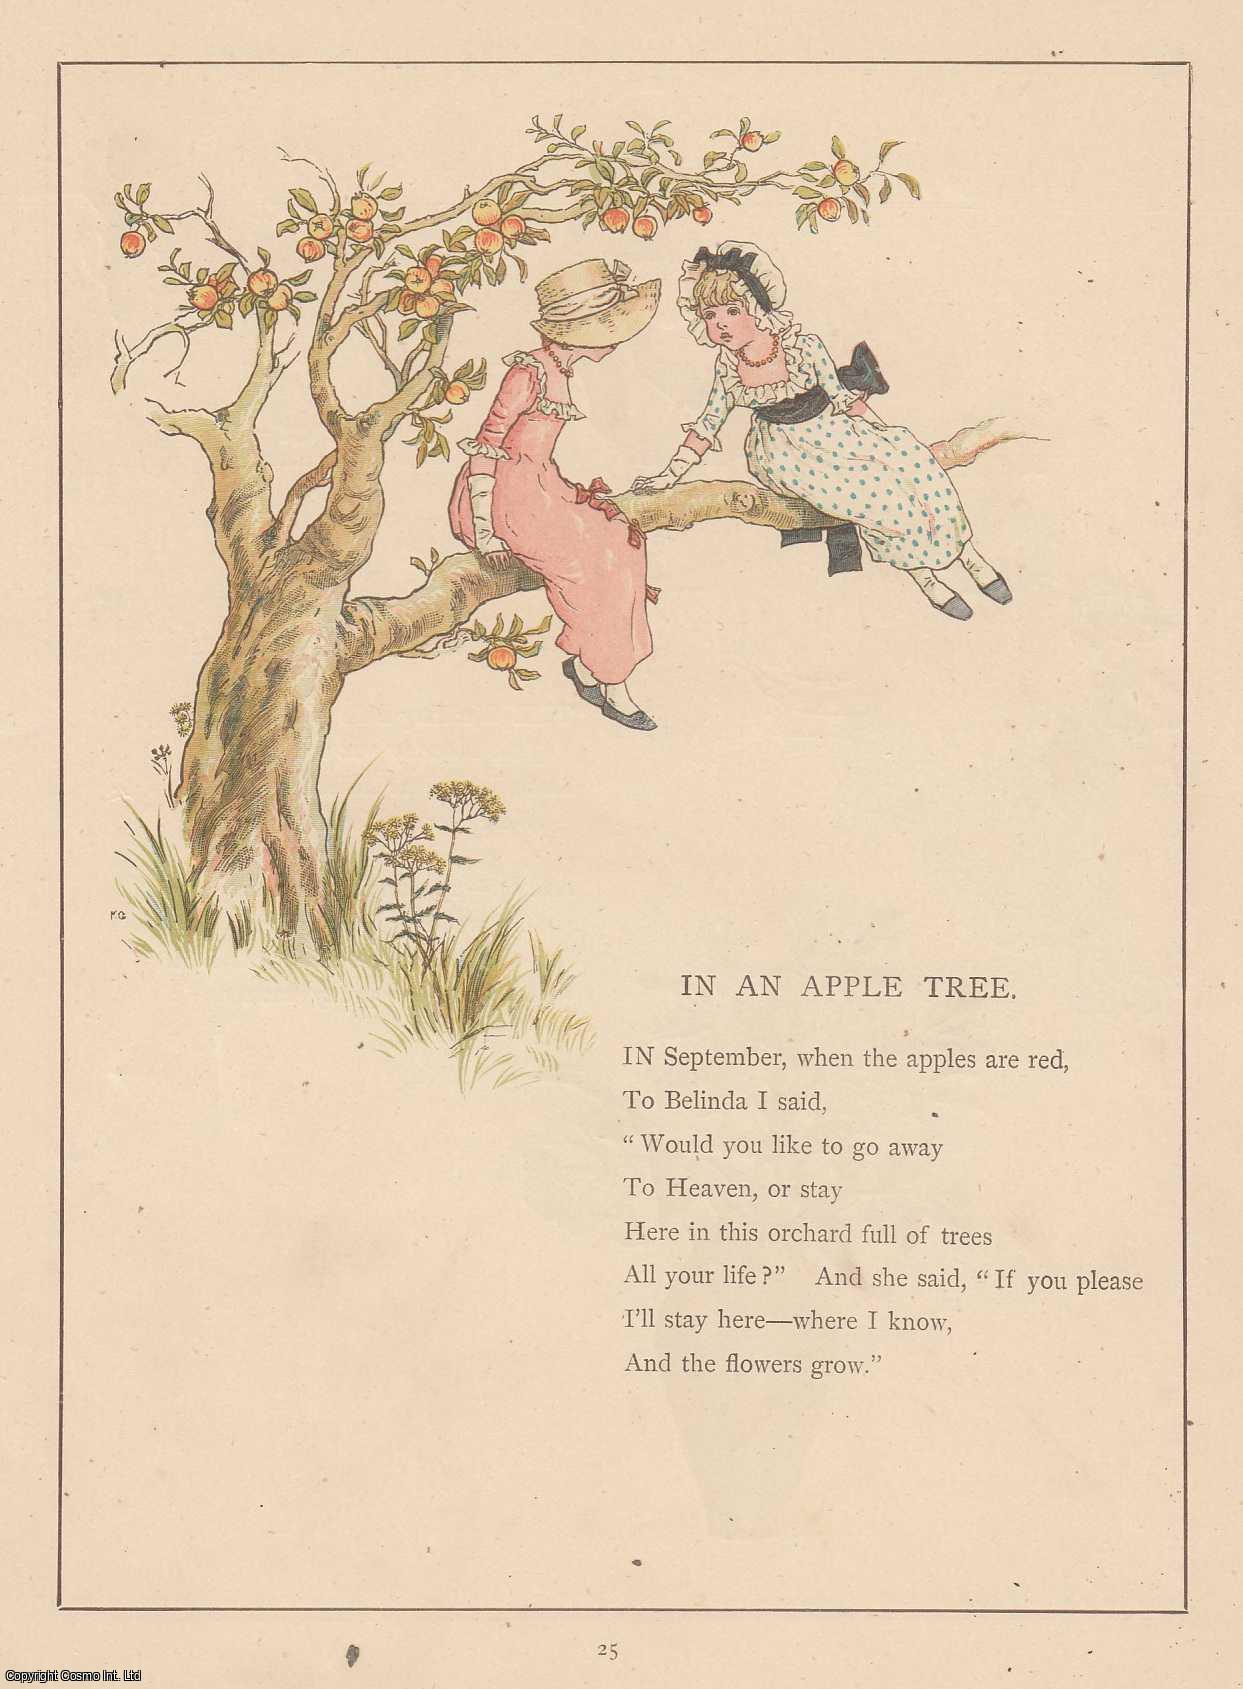 Kate Greenaway - Marigold Garden. In an Apple Tree, with rhyme. An original Kate Greenaway colour print, c.1885 from the work Marigold Garden, printed in colours by the expert printer Edmund Evans.